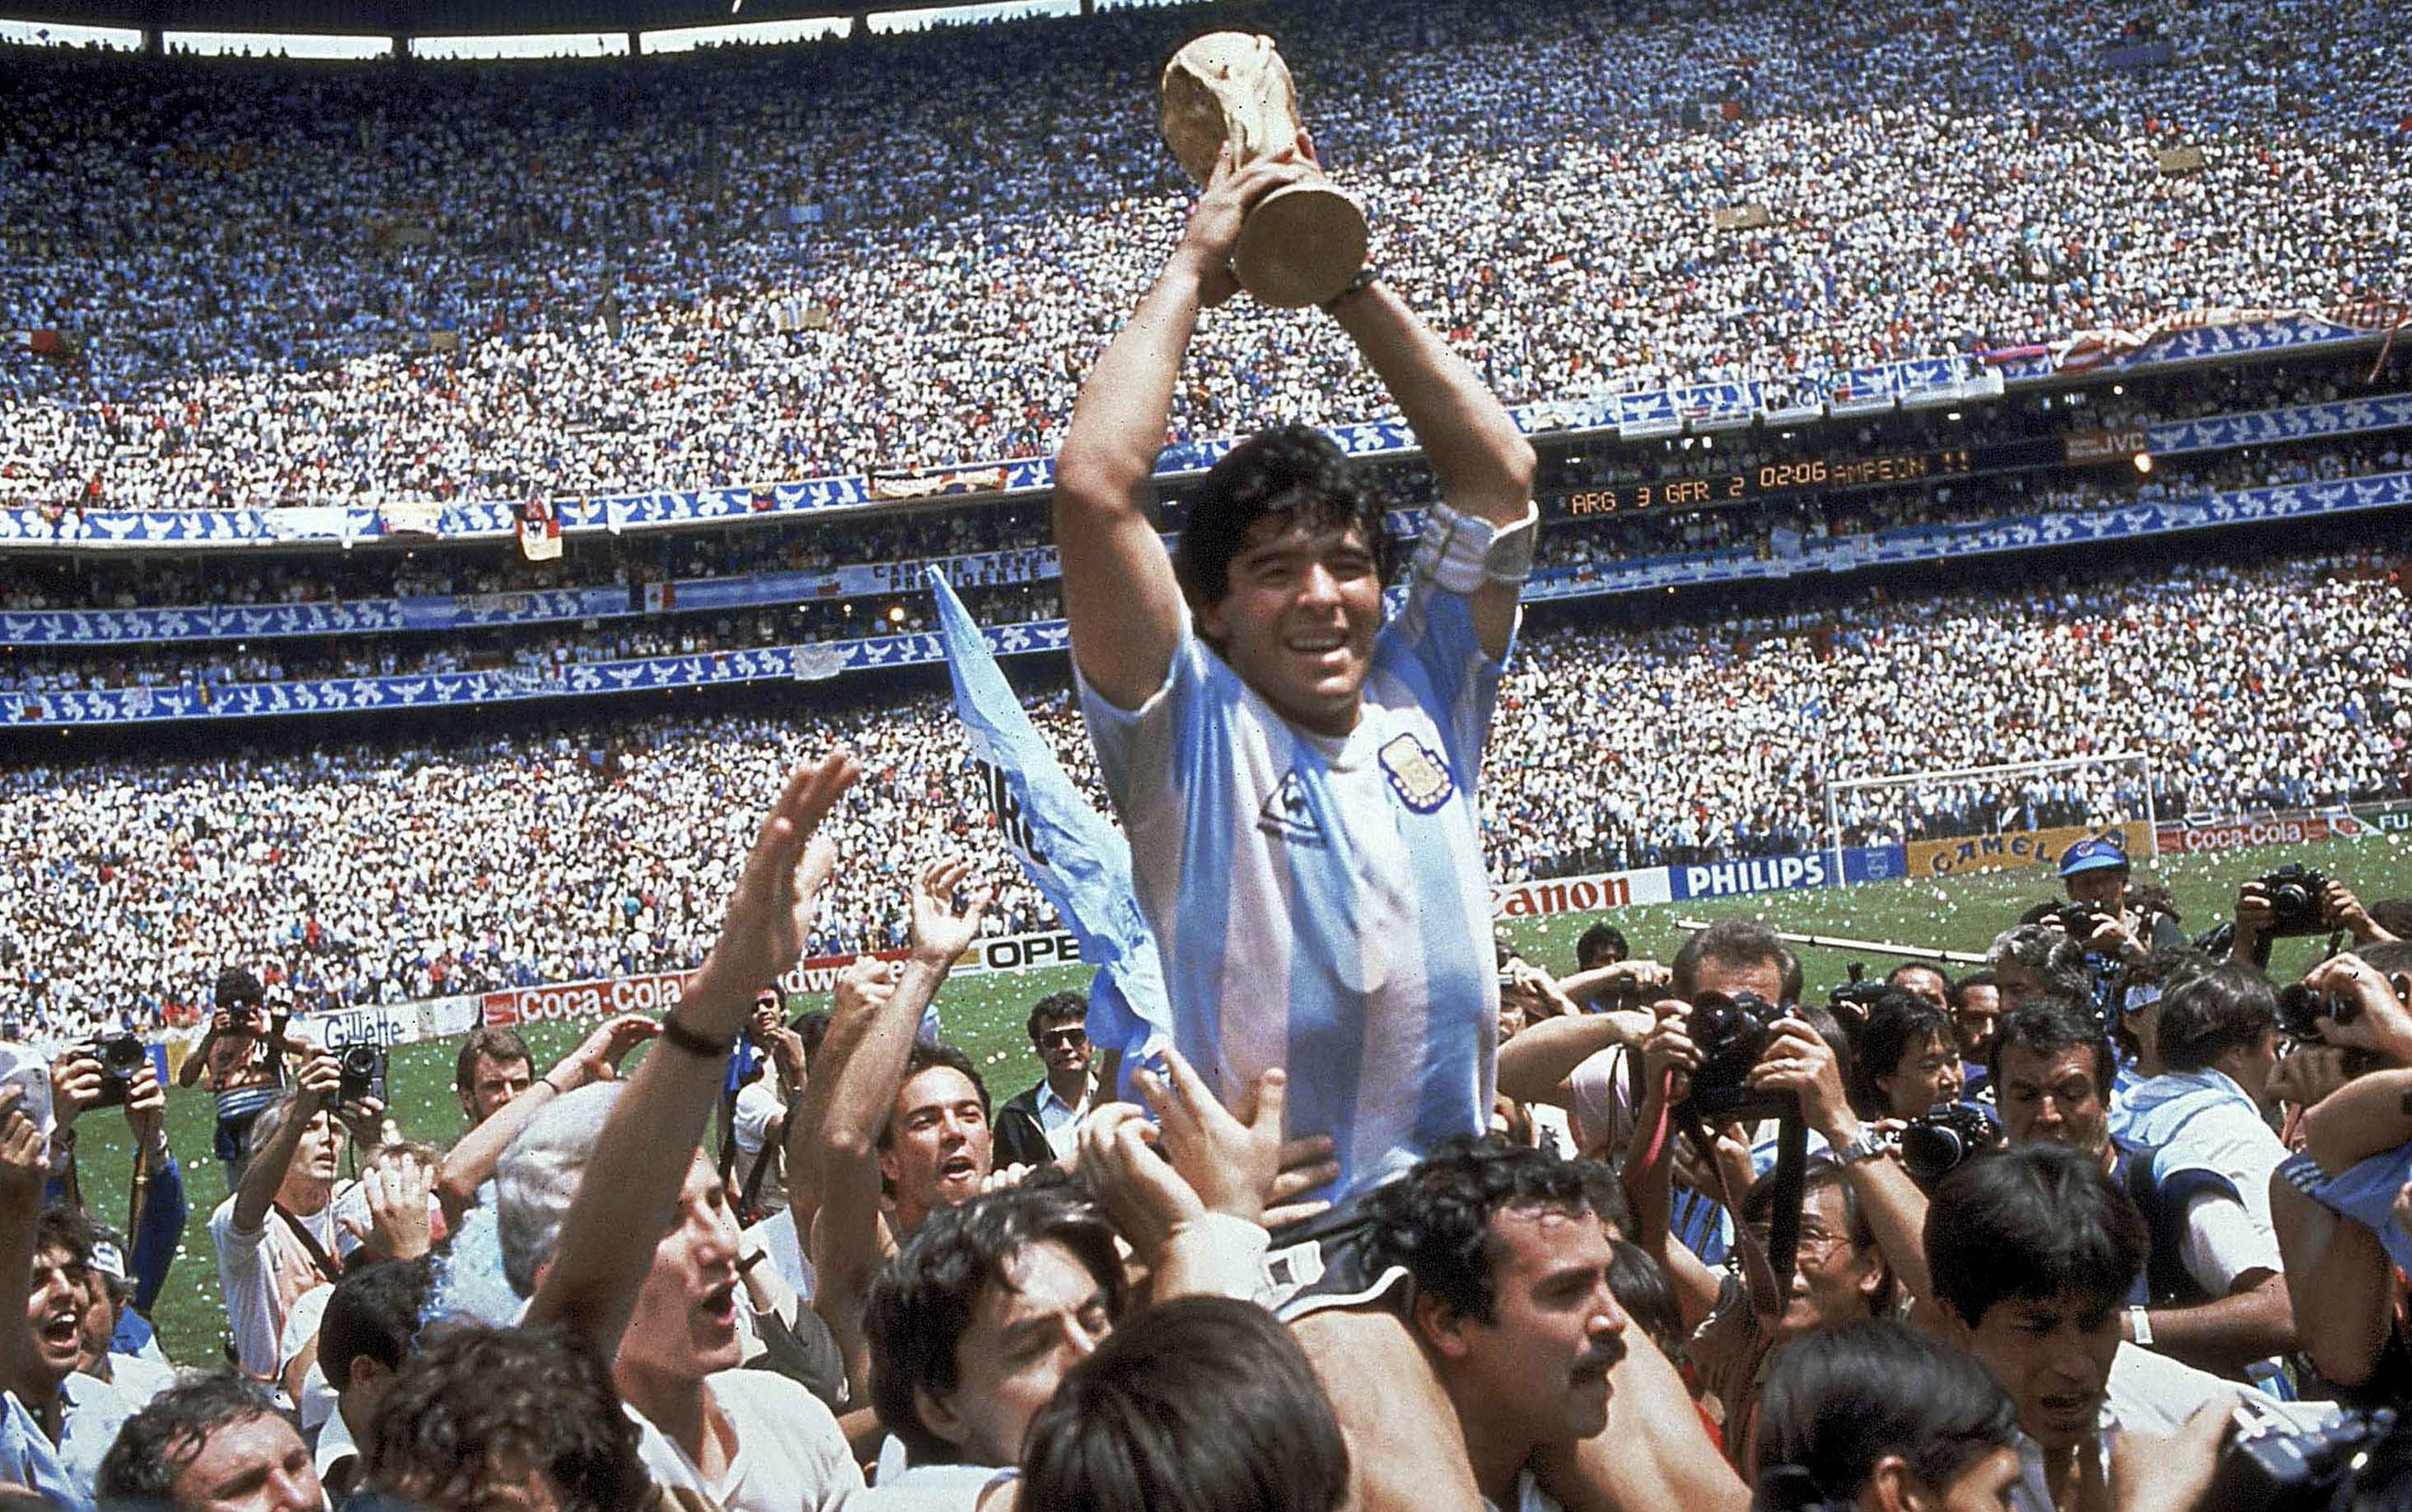 History of the World Cup: 1986 – Maradona puts on a show in Mexico - Sportsnet.ca